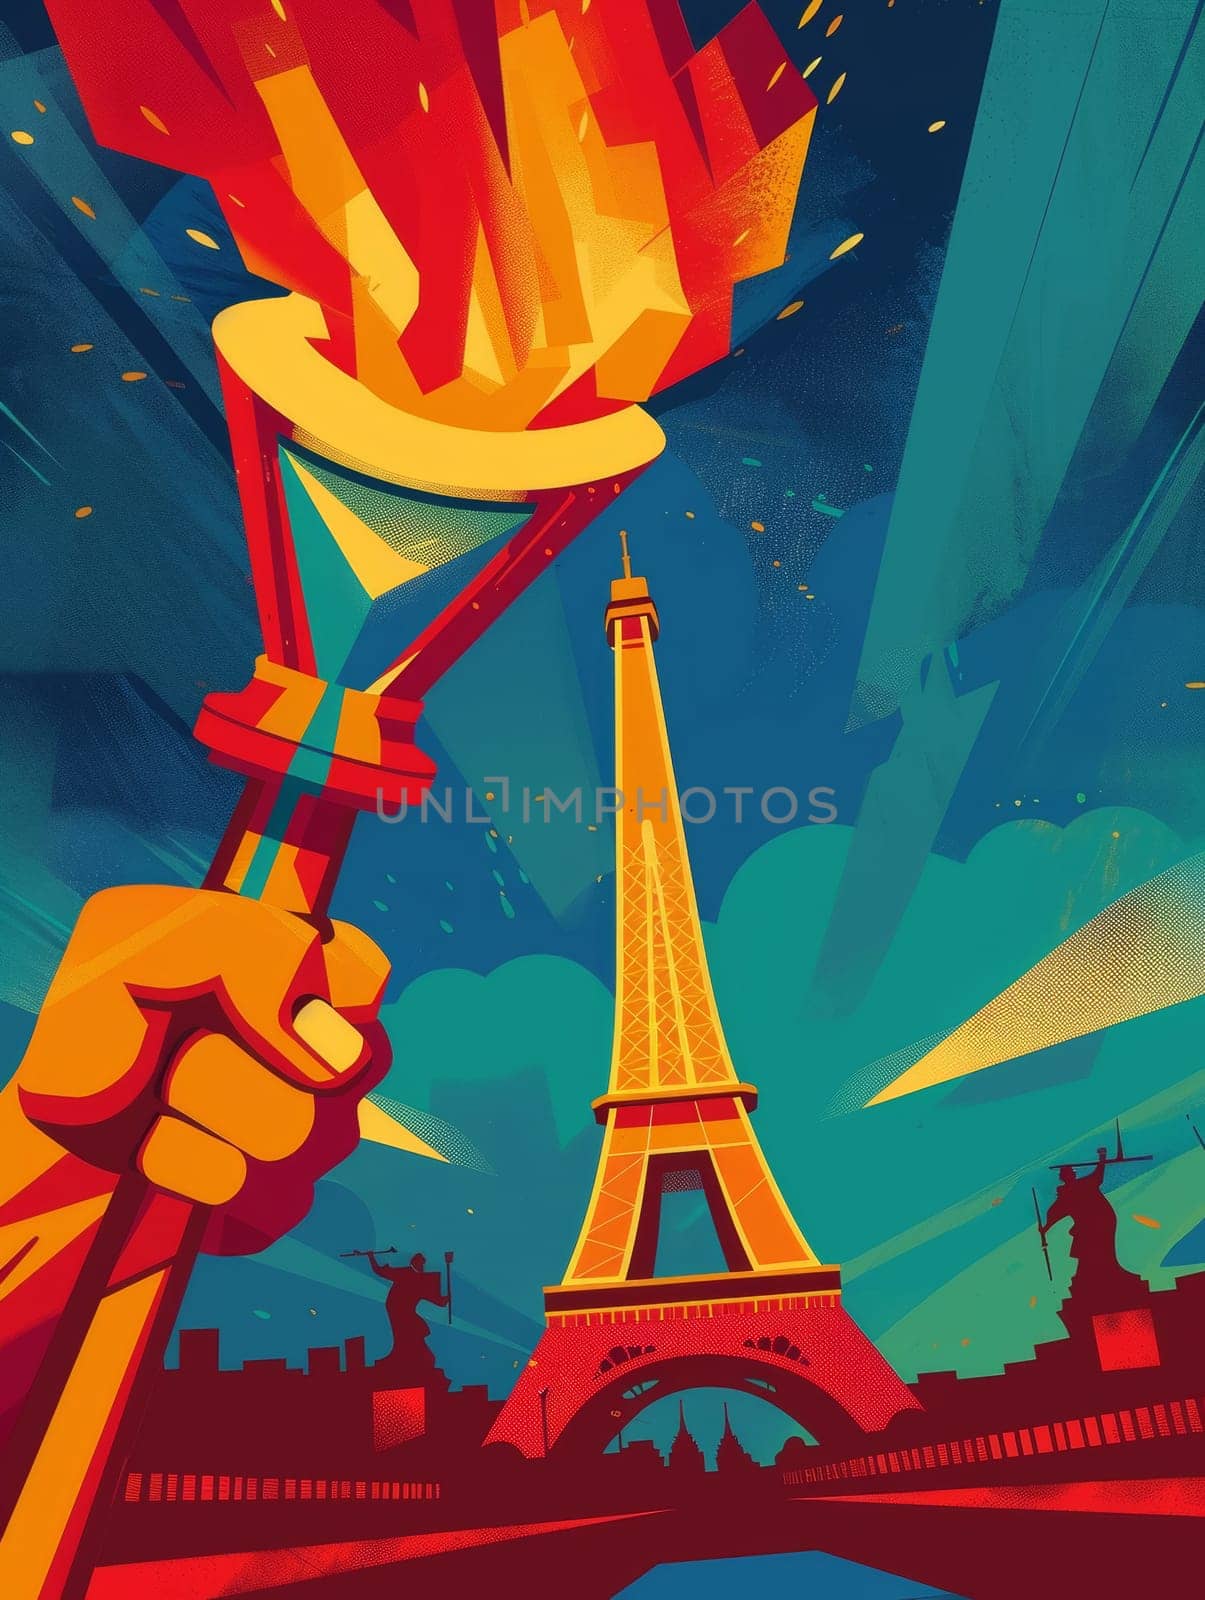 A graphic illustration captures the torch being held aloft in front of the Eiffel Tower, evoking a sense of triumph and celebration at dusk. by sfinks